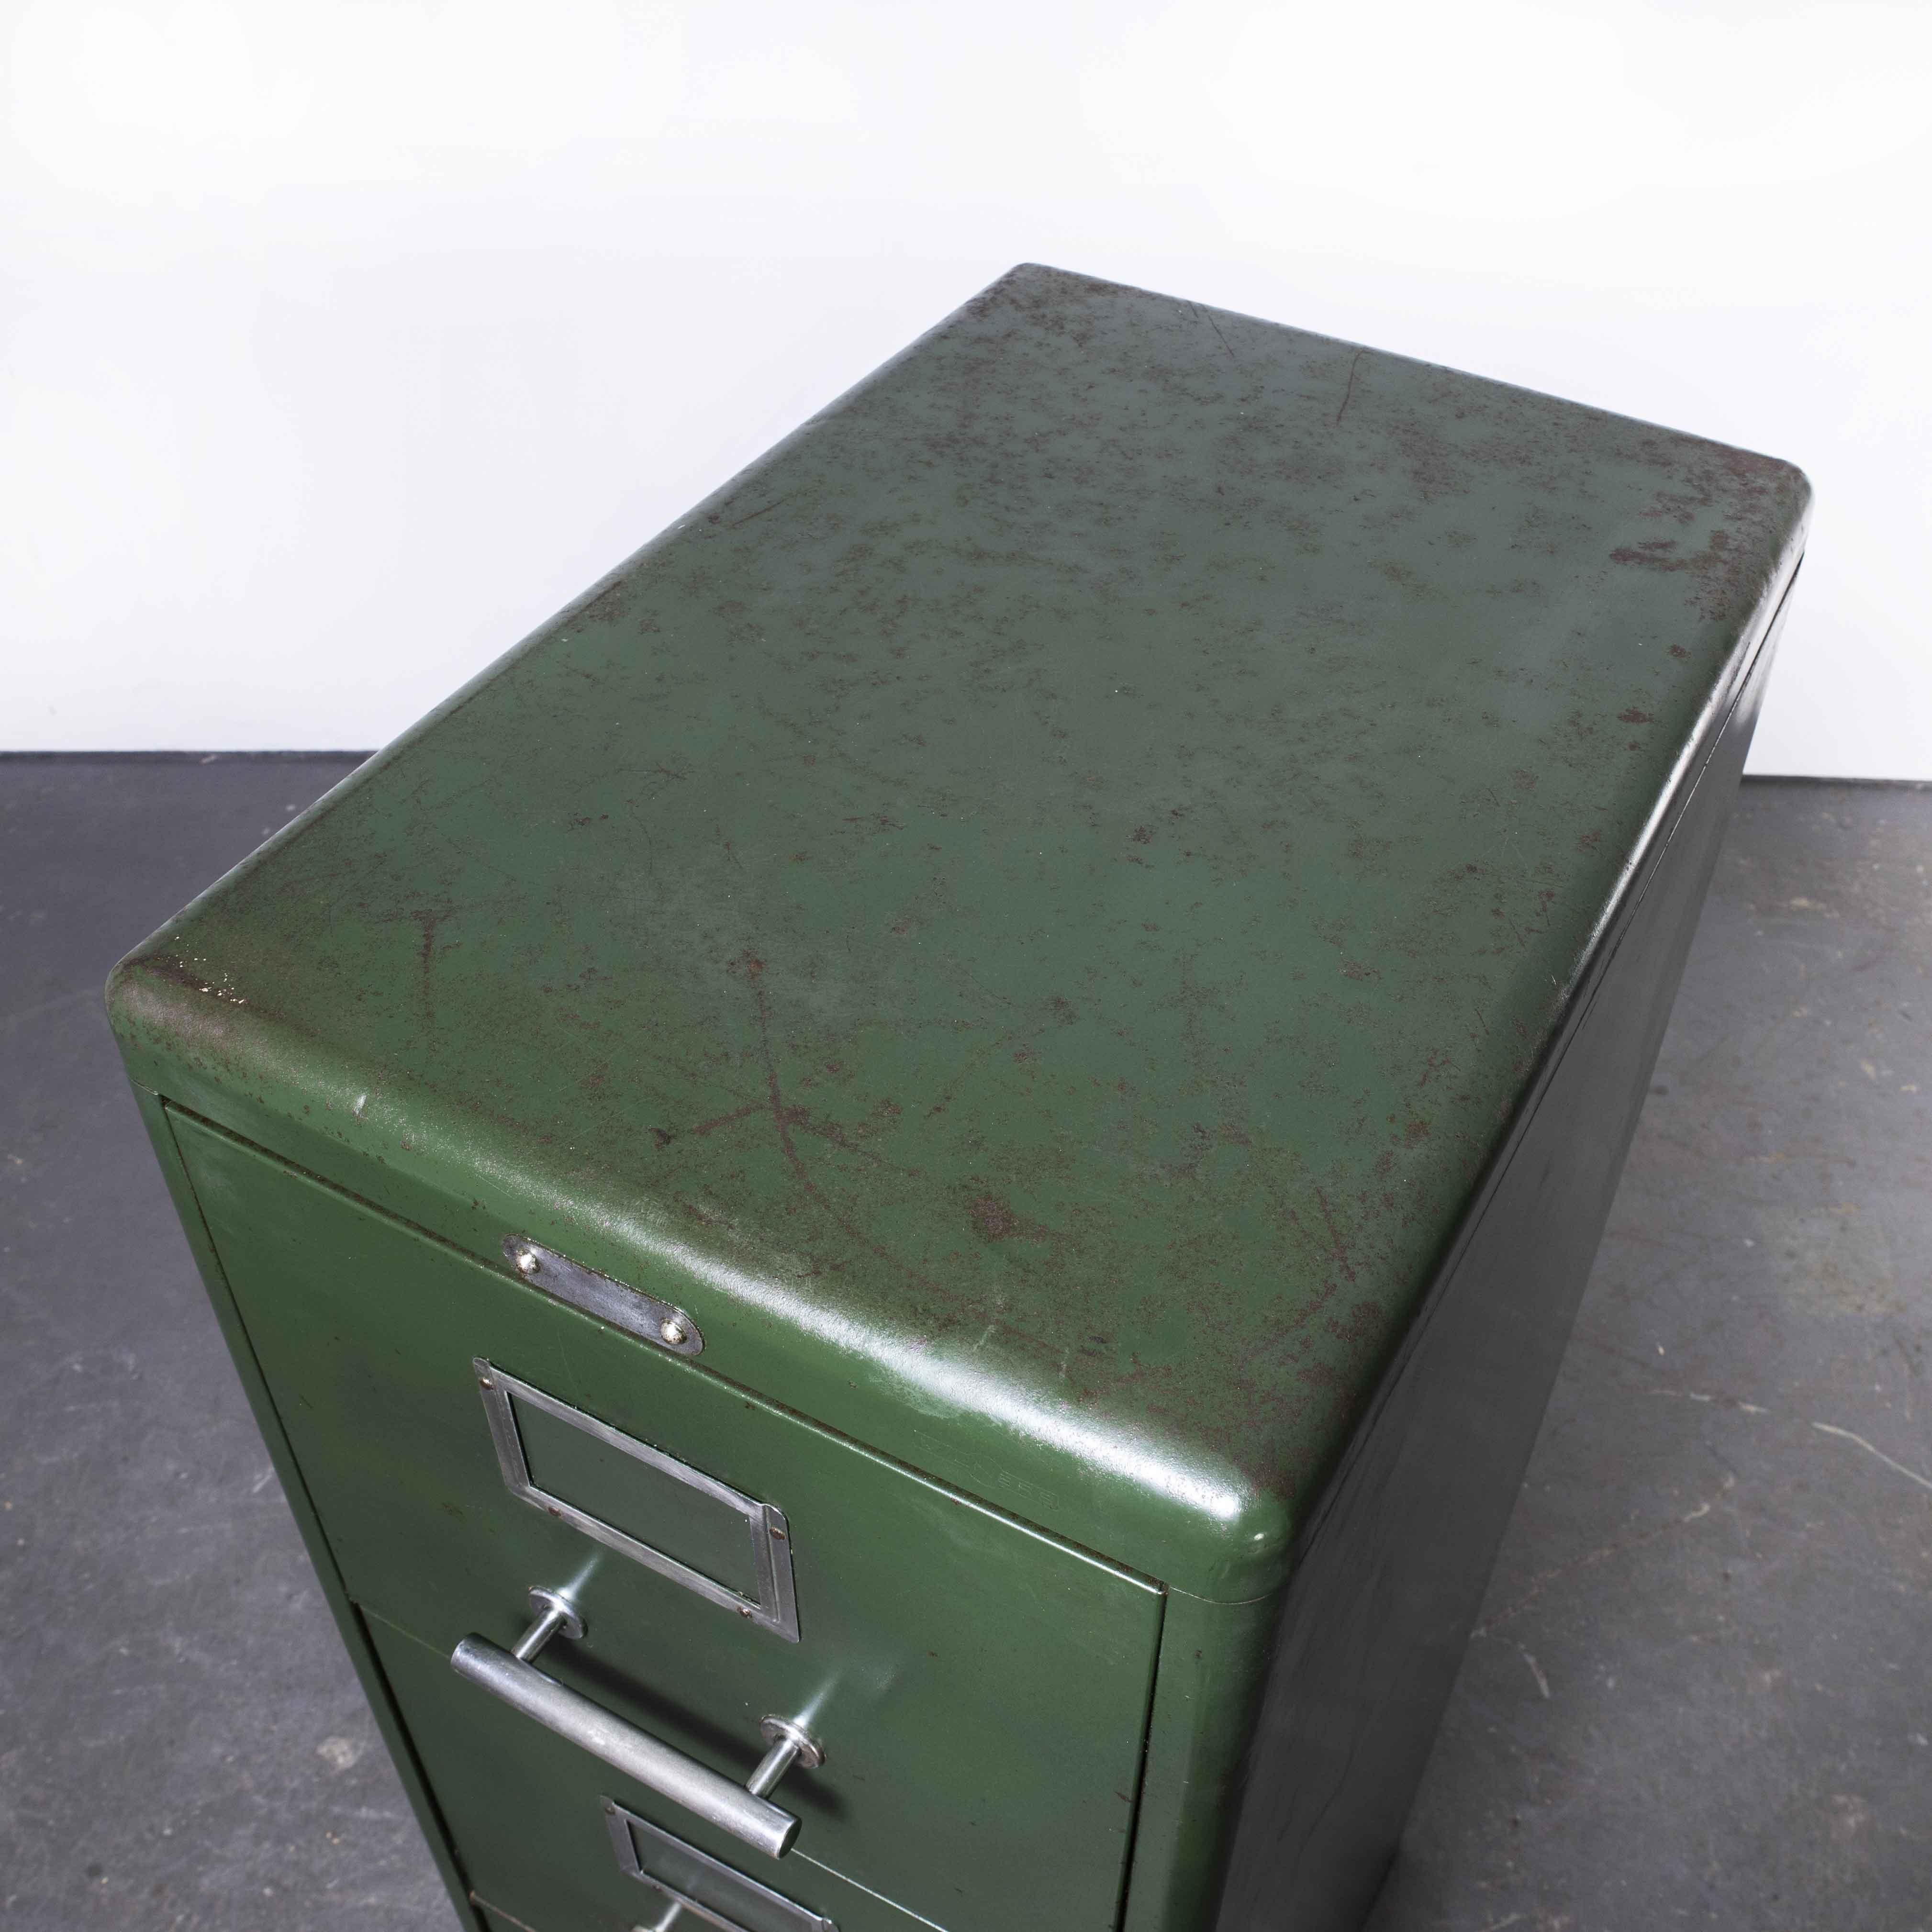 1930’s Four Drawer Milners Steel Filing cabinet

1930’s Four Drawer Milner’s Steel Filing cabinet. Milner’s was one of a number of high quality producers of steel furniture that rode the boom of classic industrialisation in the 1930’s as technology